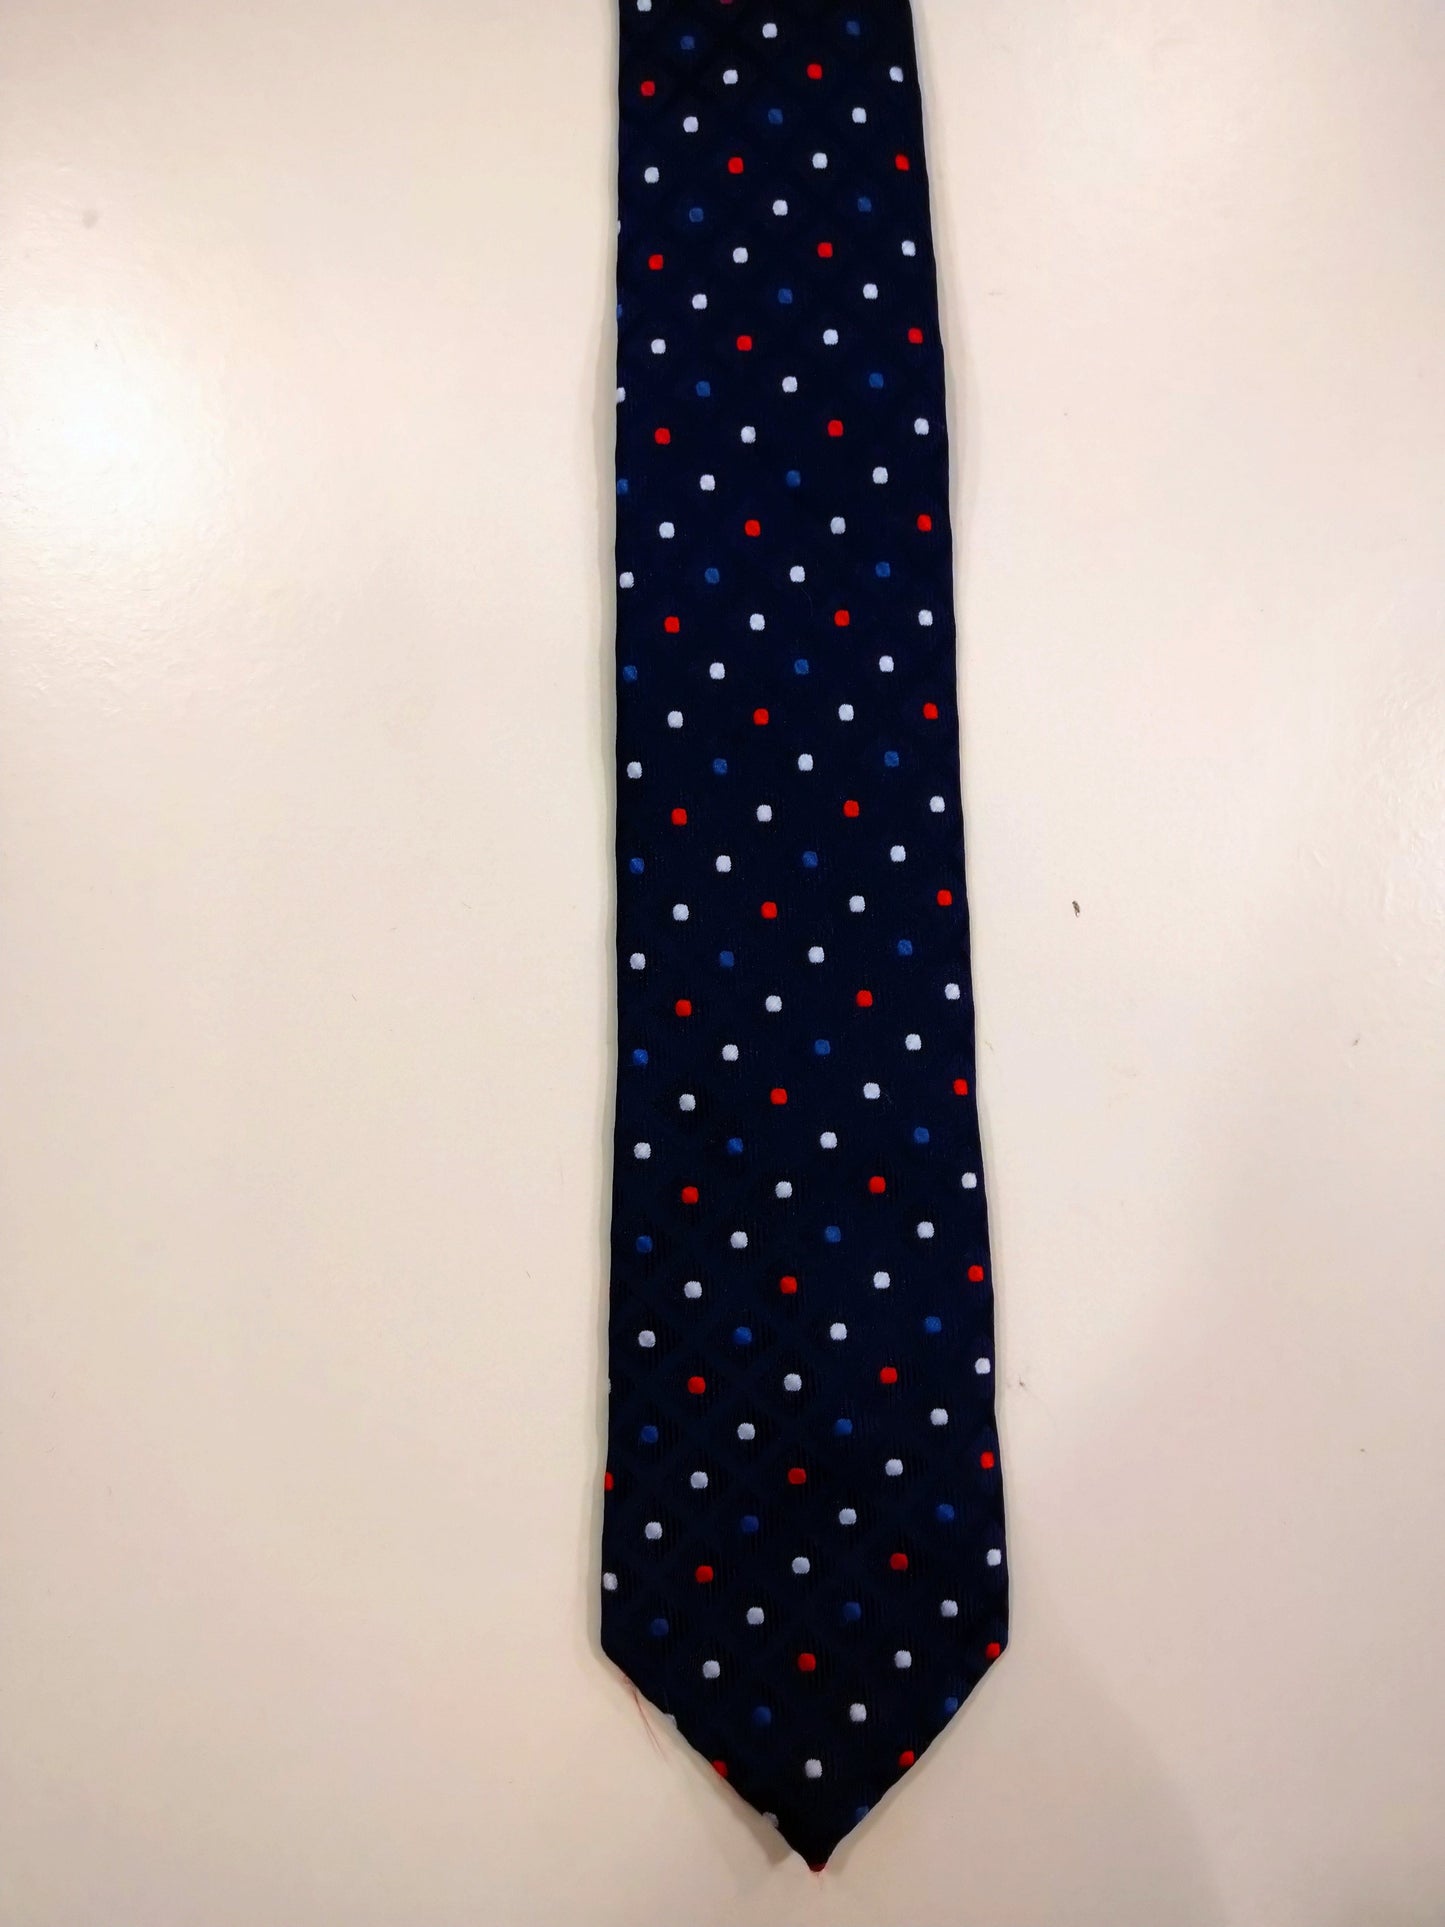 Polyester tie. Blue with balls motif.